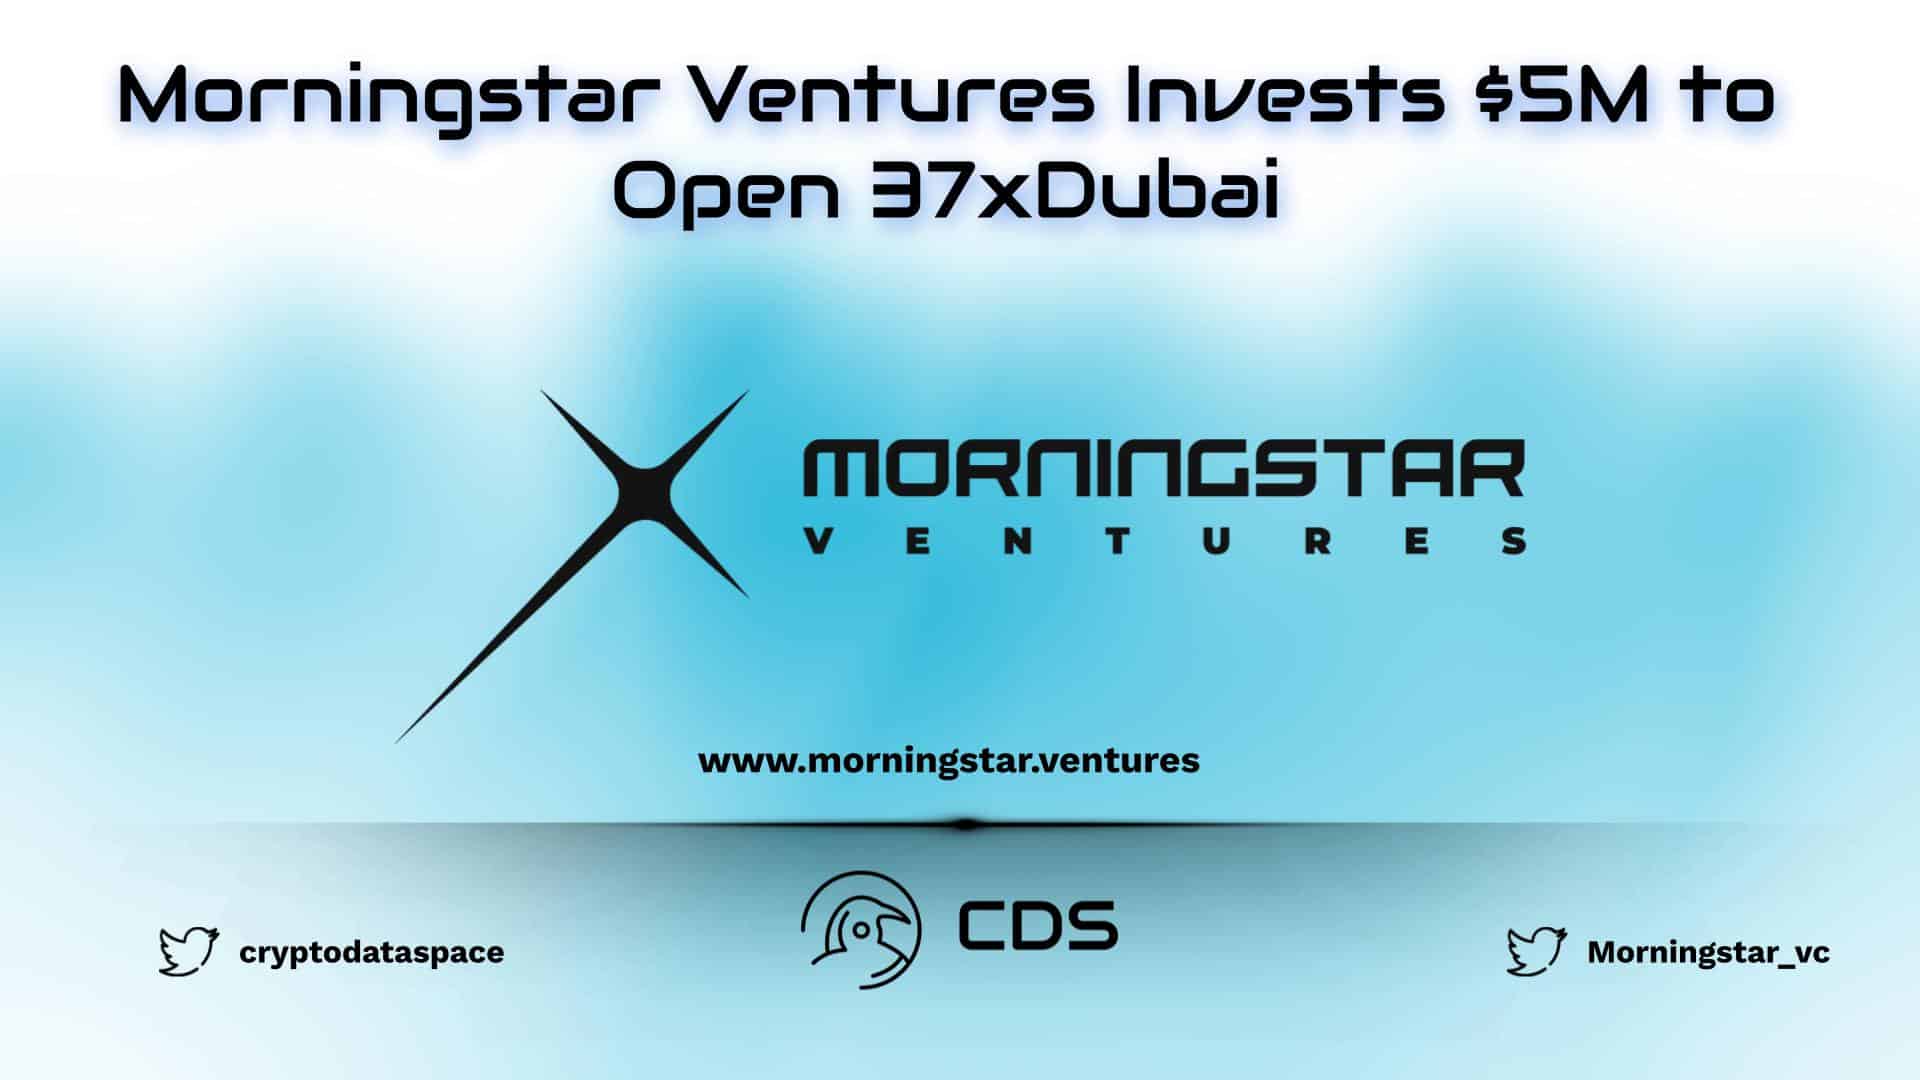 Morningstar Ventures Invests $5M to Open 37xDubai